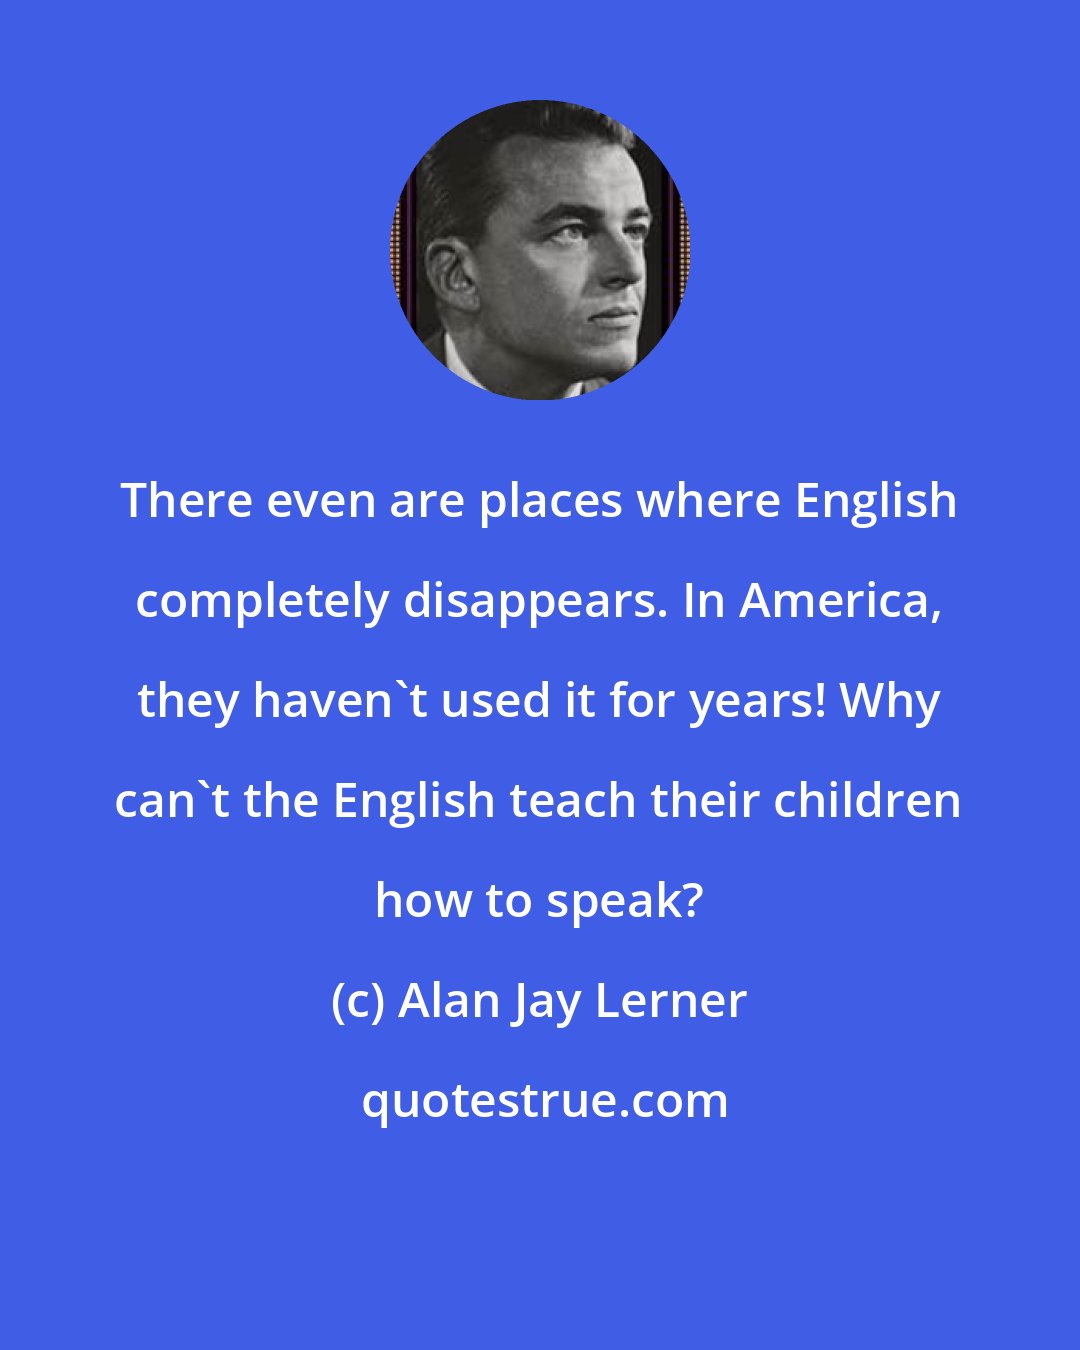 Alan Jay Lerner: There even are places where English completely disappears. In America, they haven't used it for years! Why can't the English teach their children how to speak?